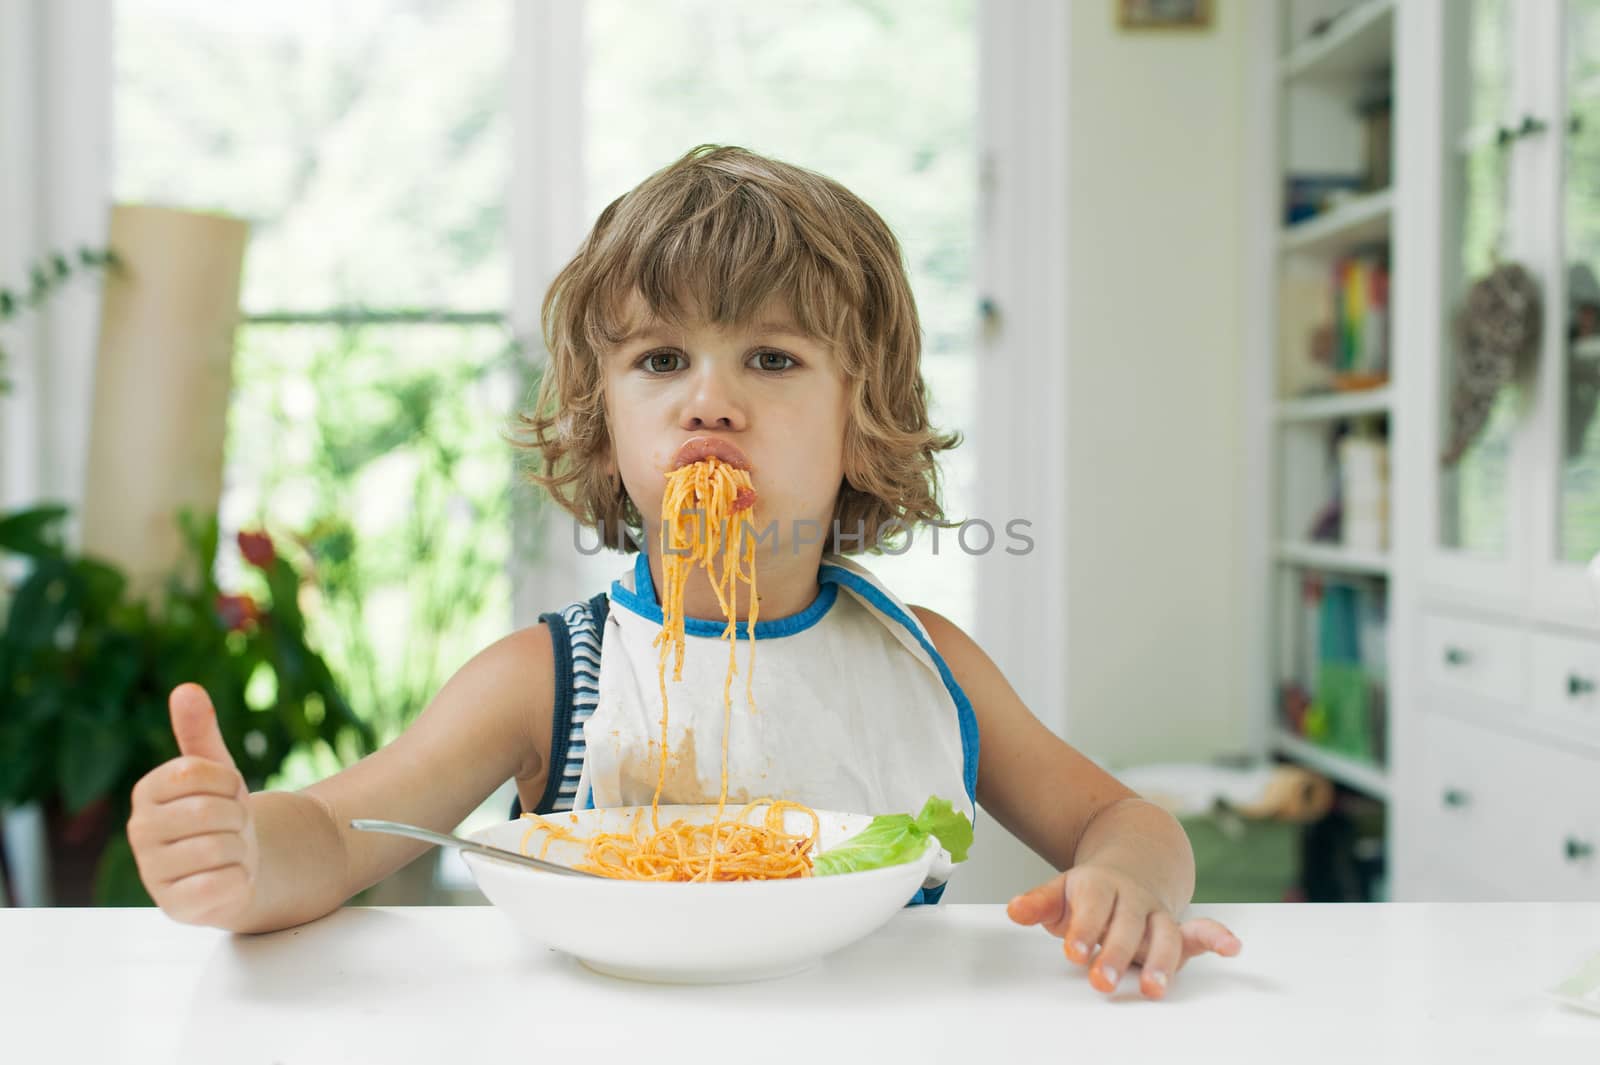 Portrait of a cute young boy making a mess while eating pasta for lunch. Bad manners concept.